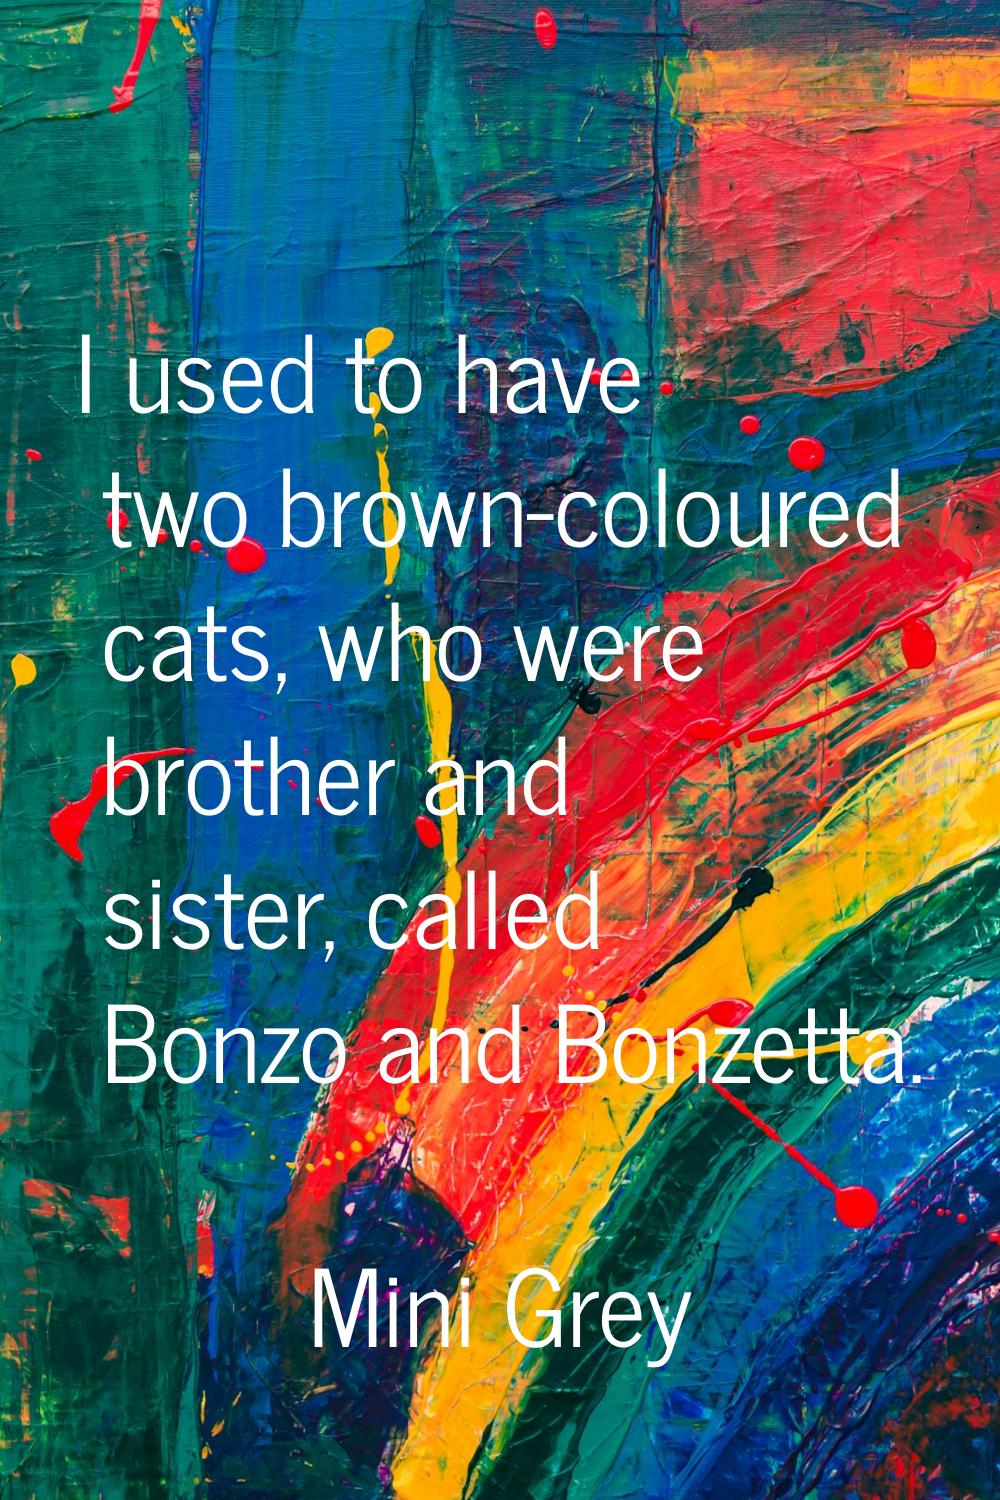 I used to have two brown-coloured cats, who were brother and sister, called Bonzo and Bonzetta.